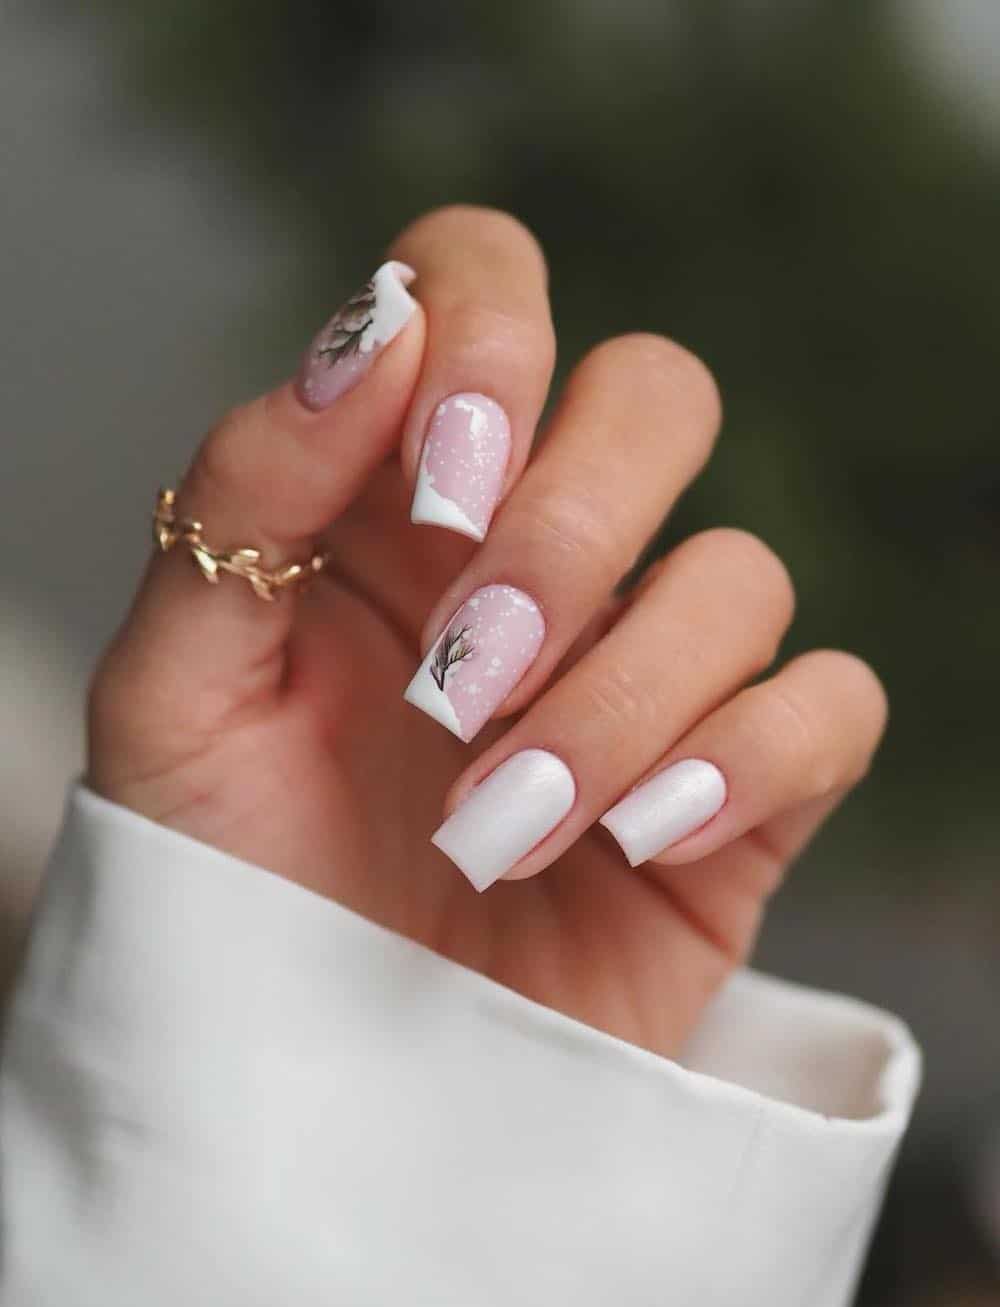 A hand with medium square nails painted a soft pink with white snow nail art and two glossy white accent nails